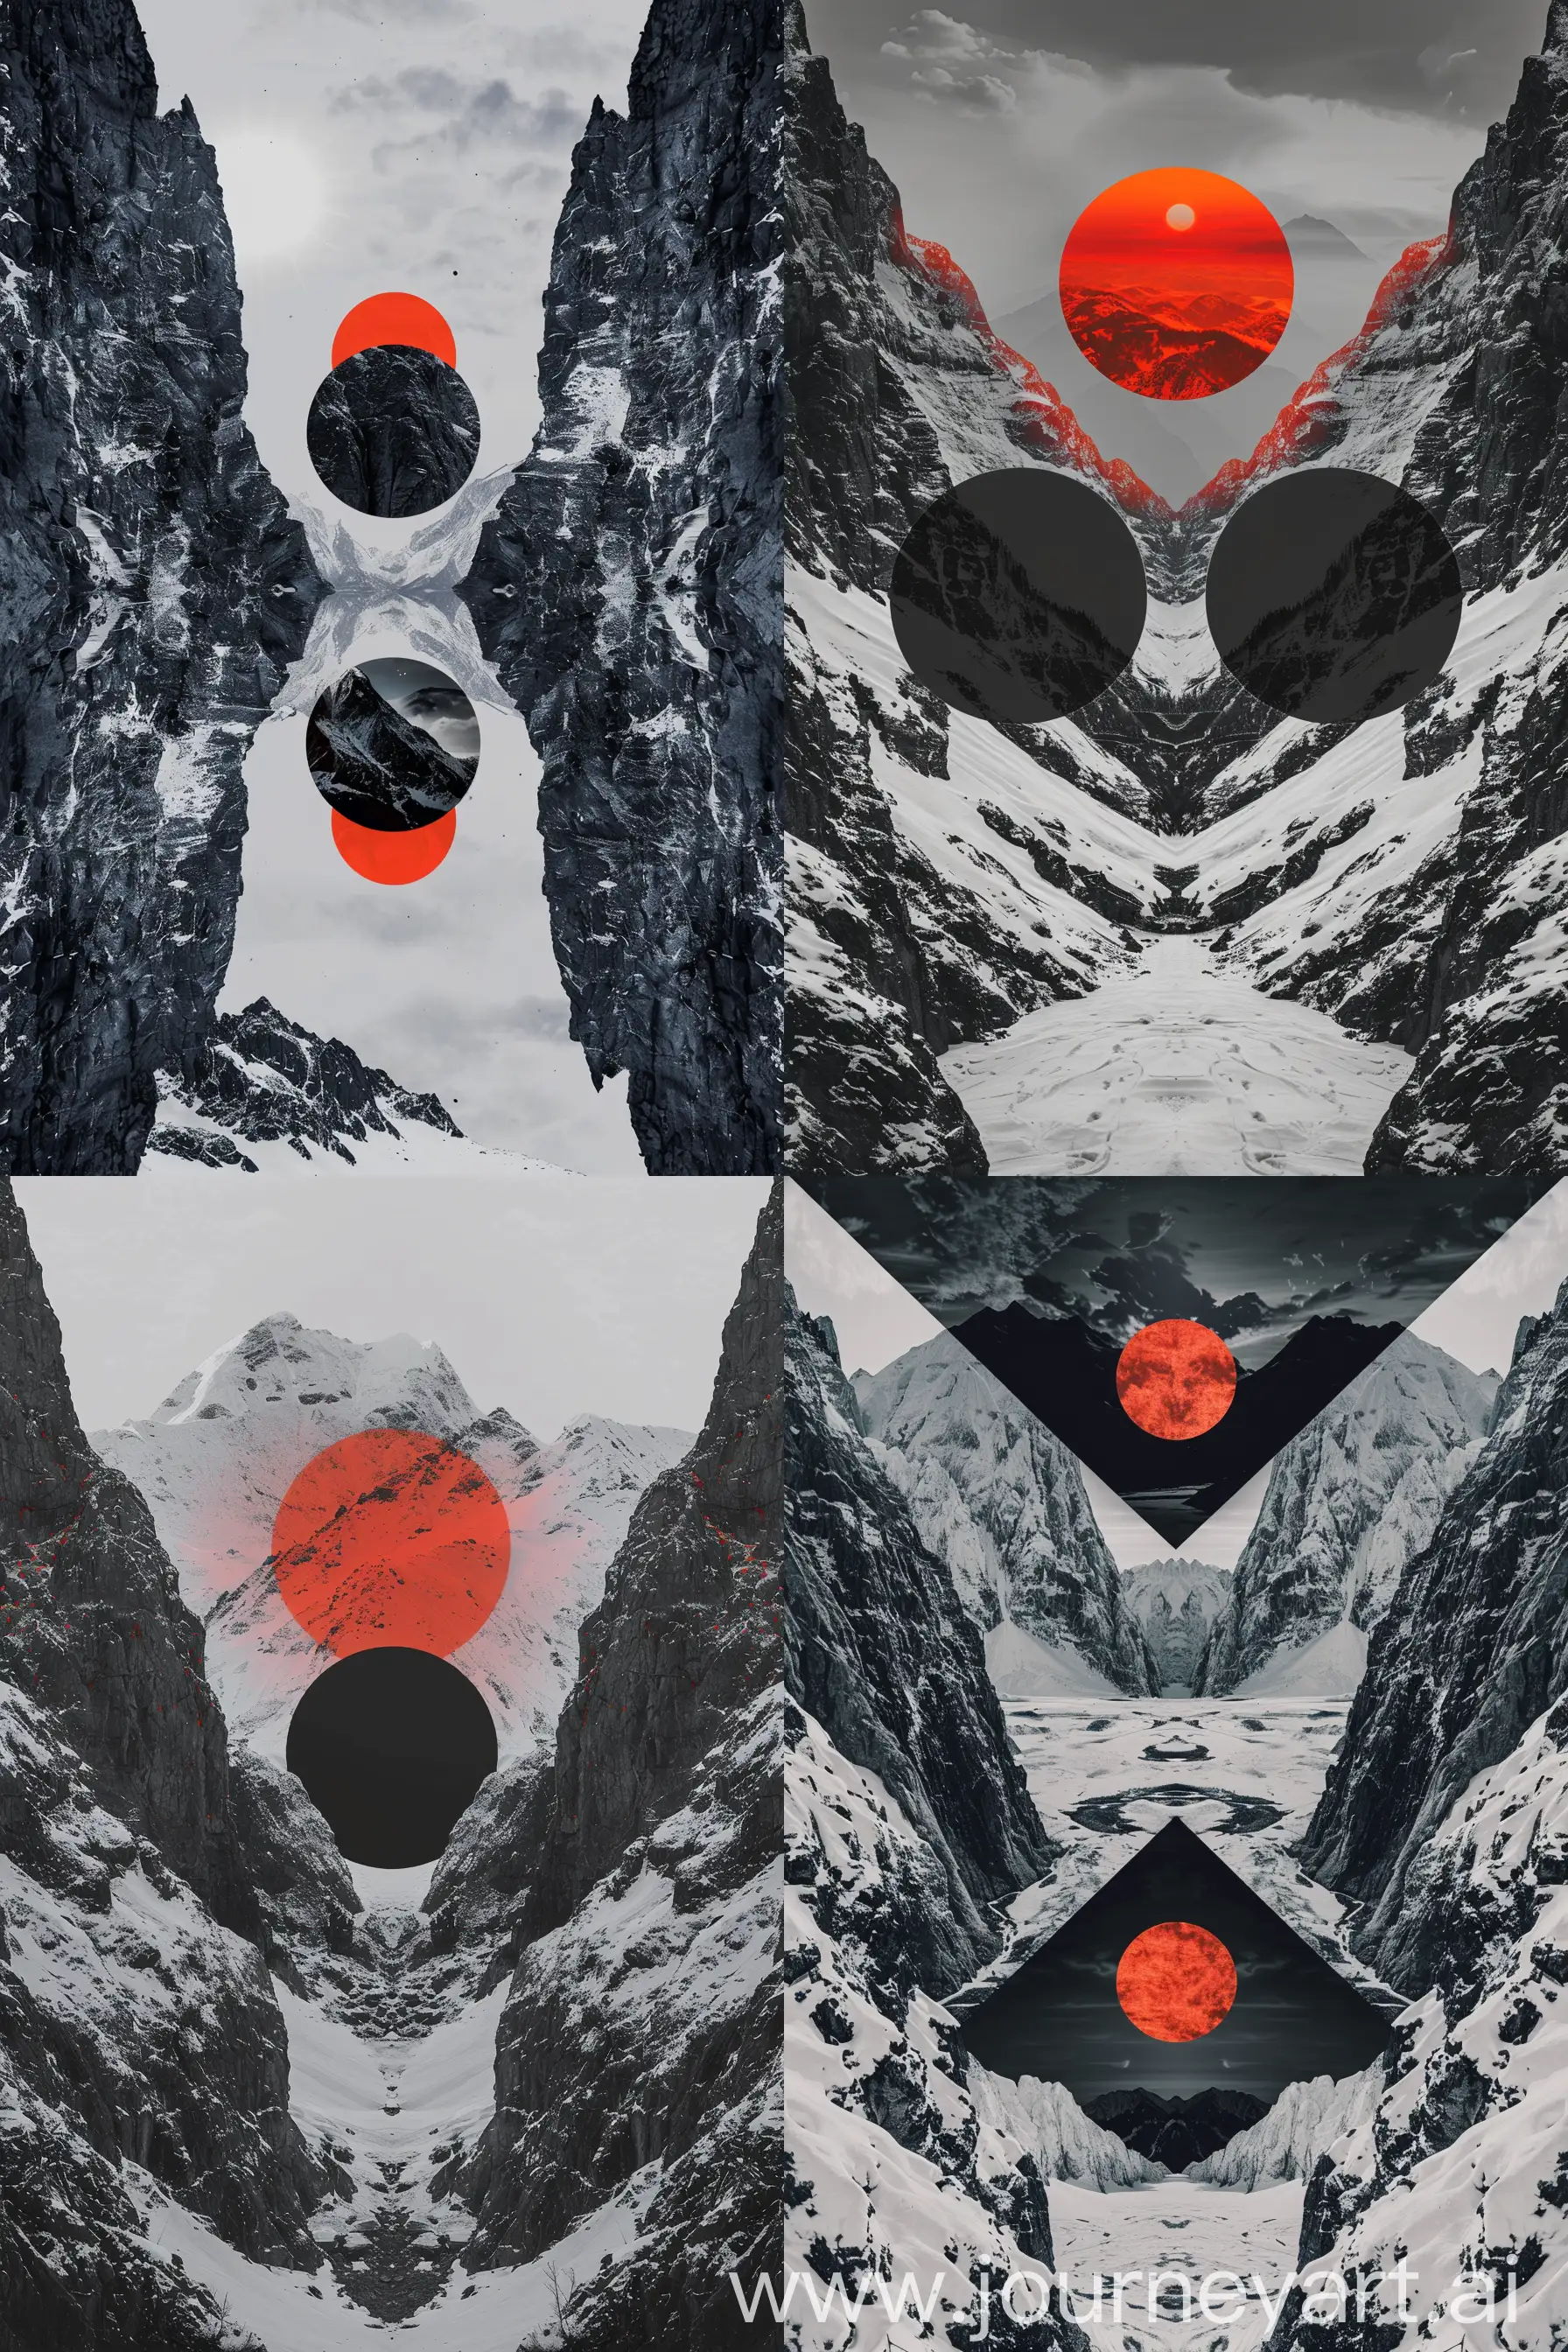 Symmetrical-Snowy-Mountains-with-Black-and-Red-Dual-Suns-at-Dusk